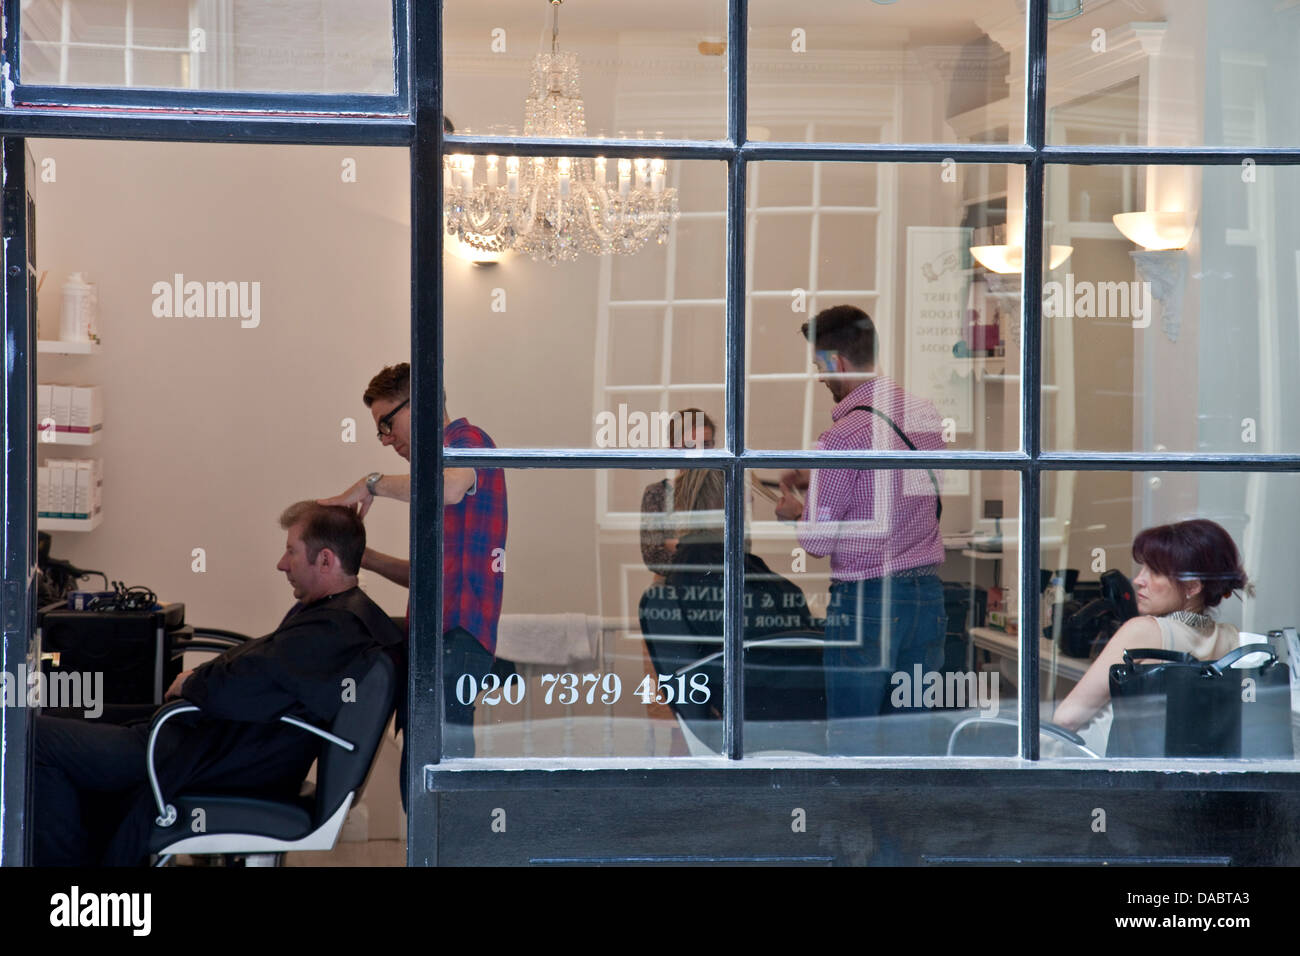 Hairdressers Shop, Covent Garden, London, England Stock Photo